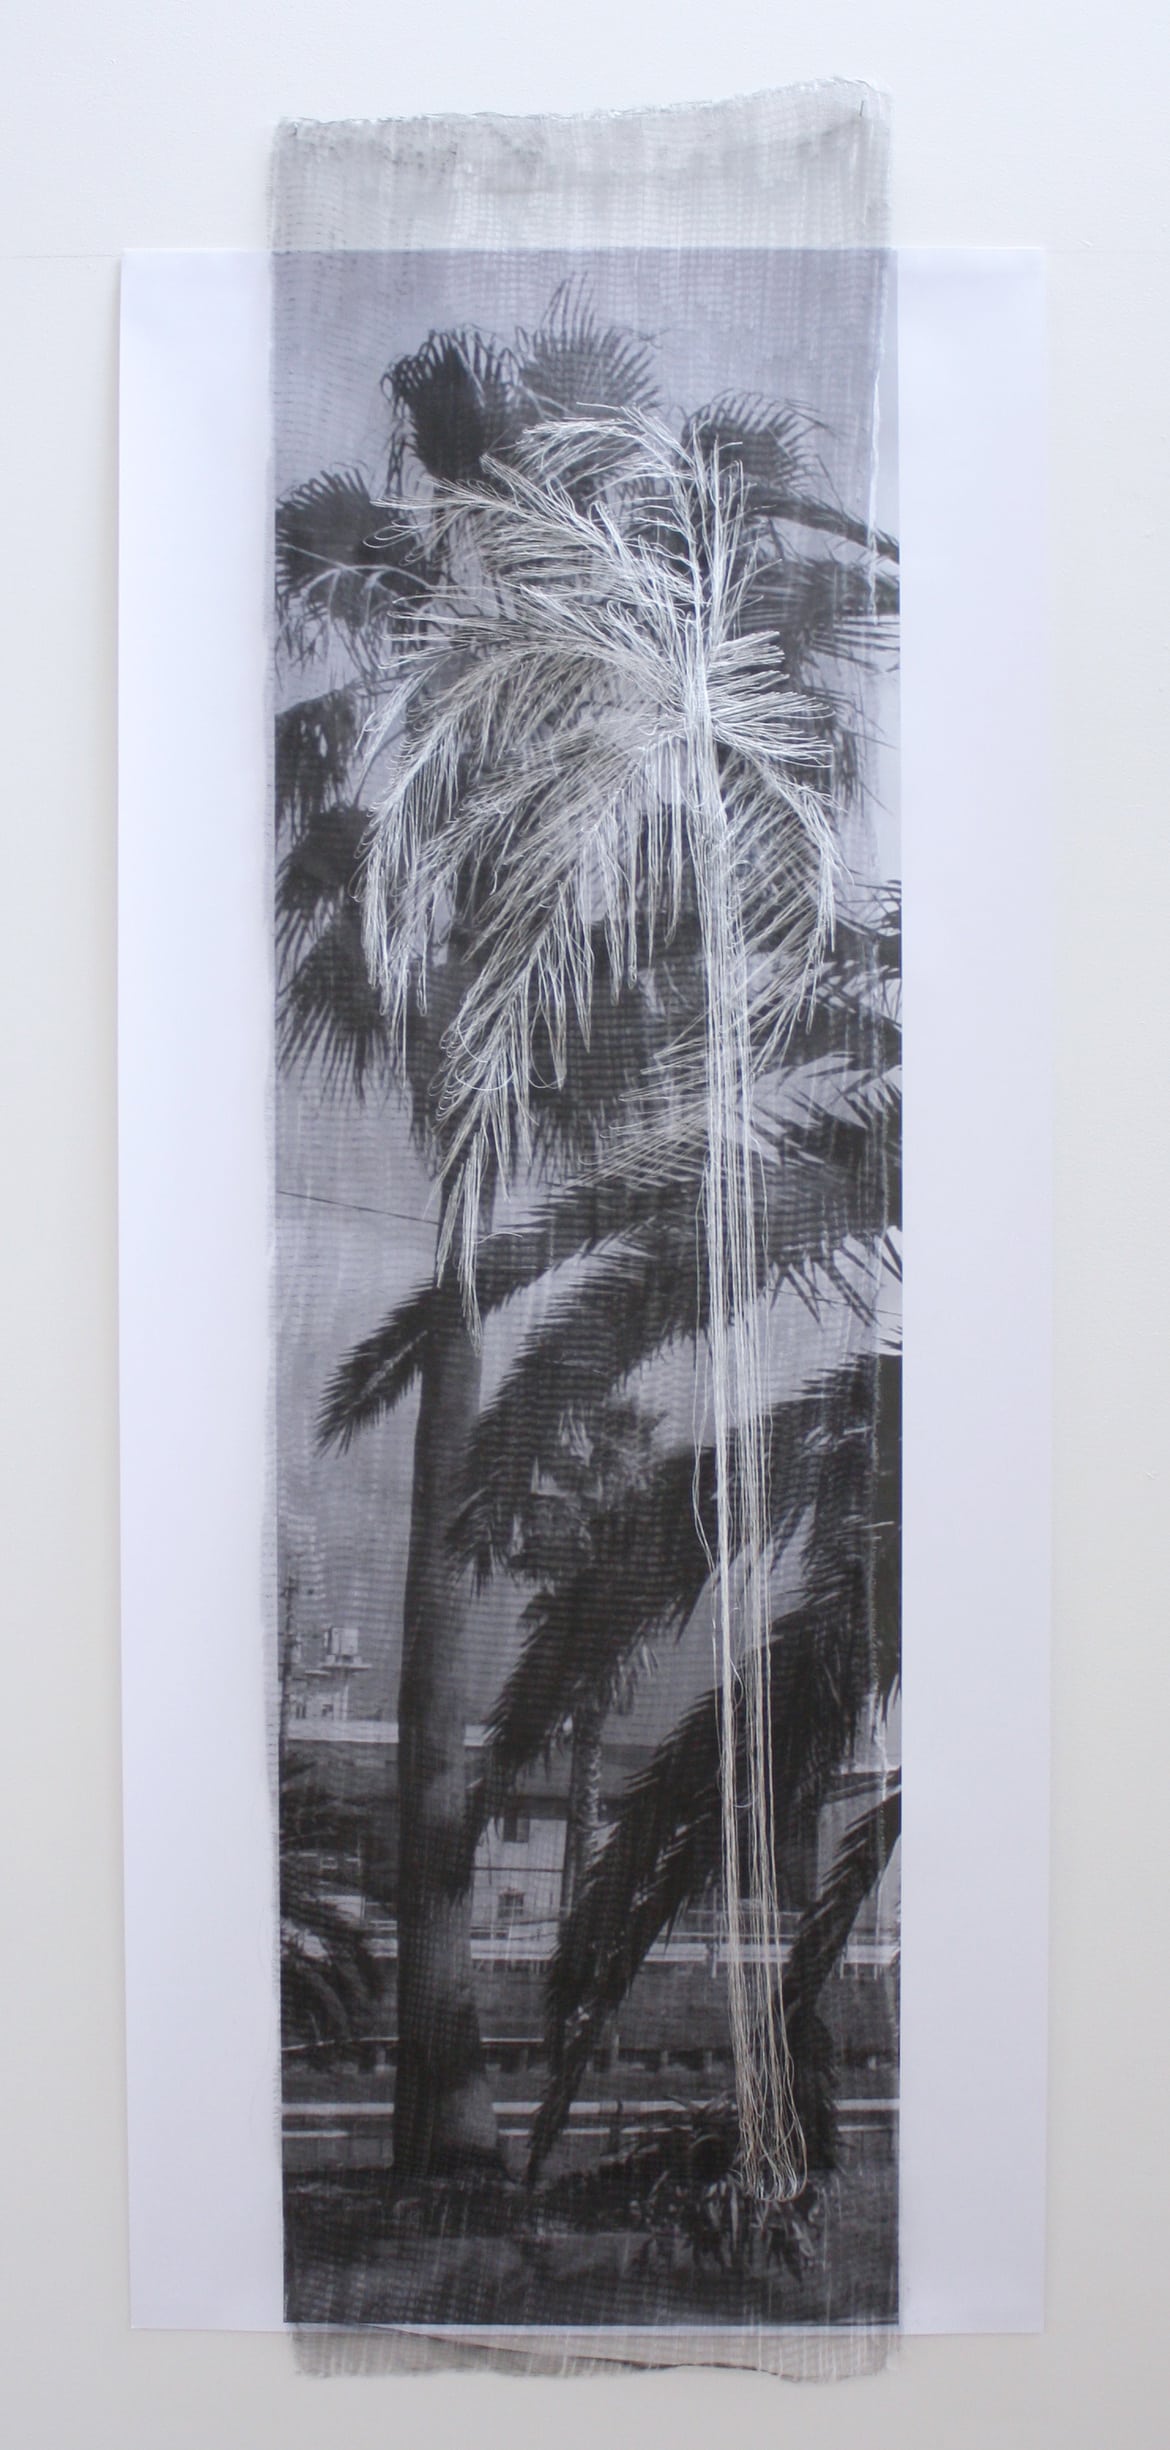 ‘They Were Still Alive in M City and N City’, 2012, print on cotton, Japanese silk thread, German synthetic cloth, 145 x 60 cm